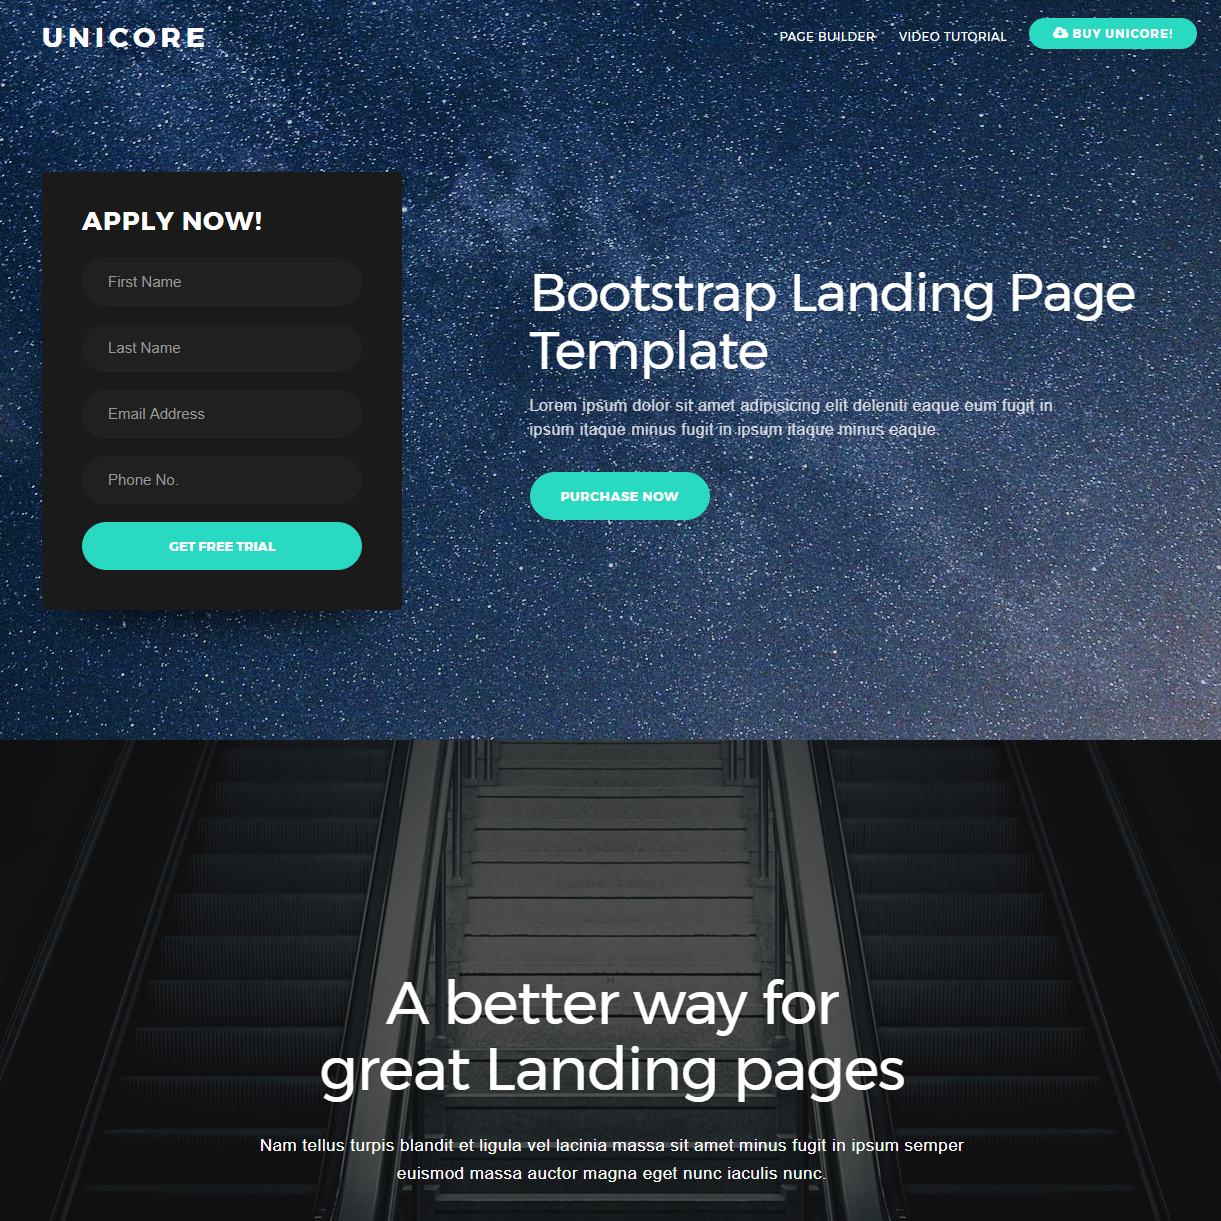 HTML Bootstrap One Page Themes